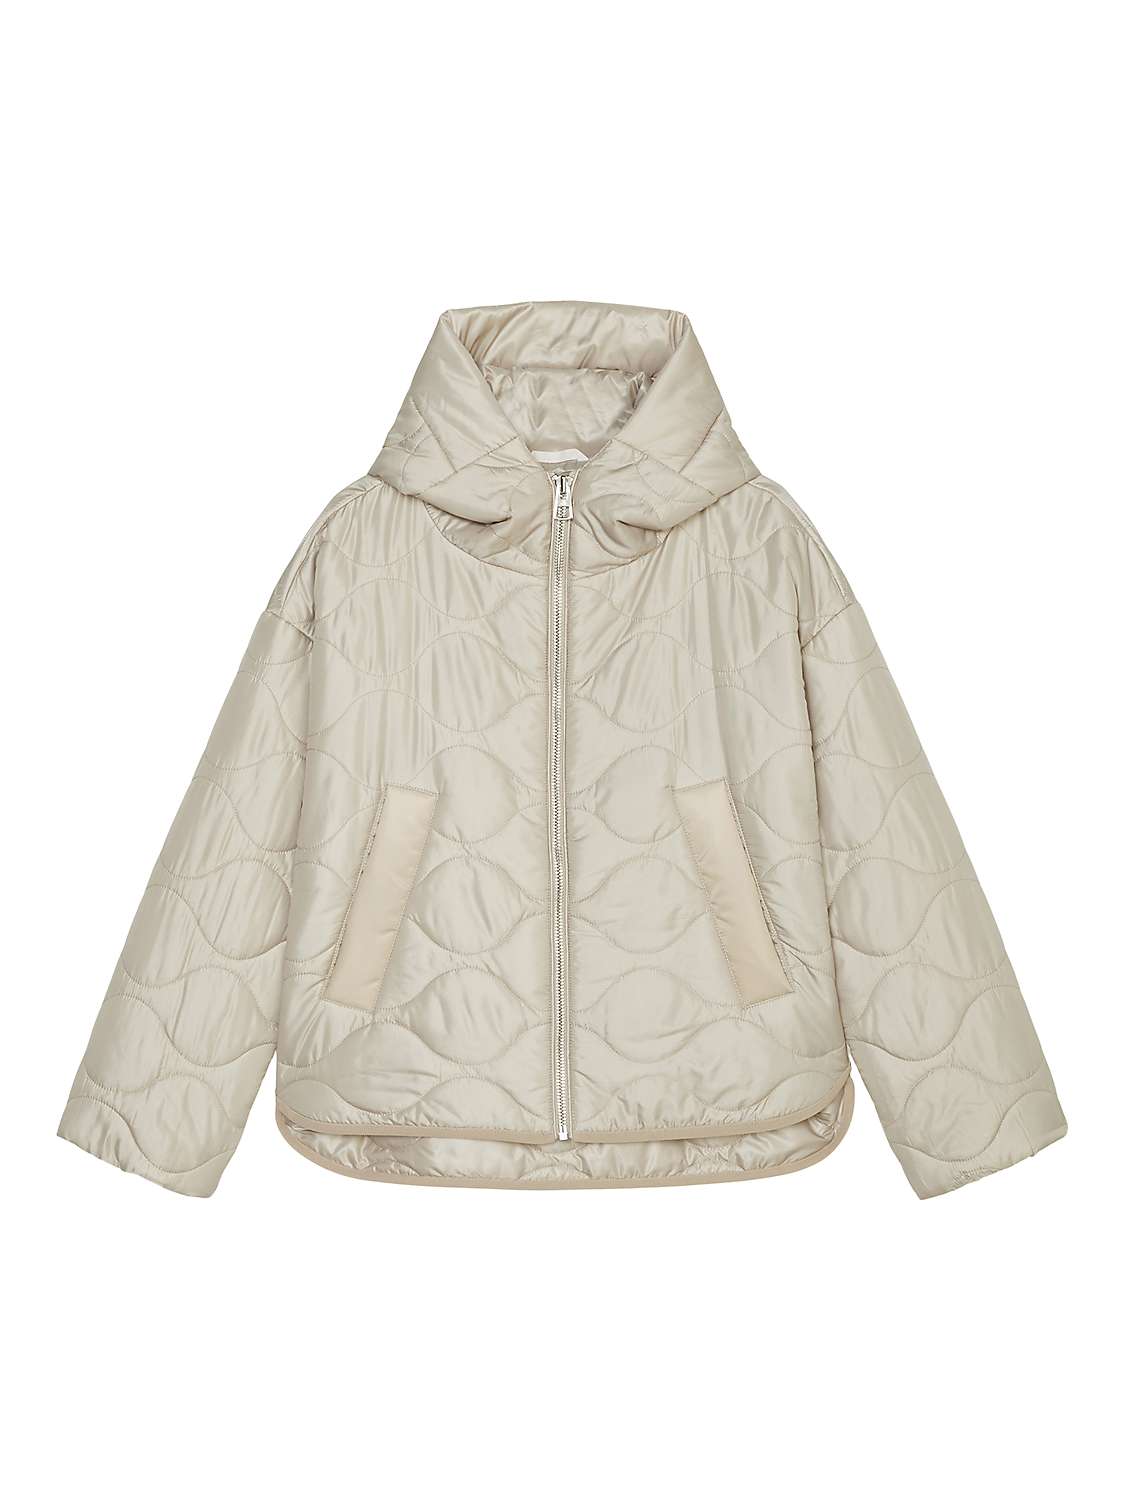 Buy Marc O'Polo Hooded Cape Style Quilt Jacket Online at johnlewis.com